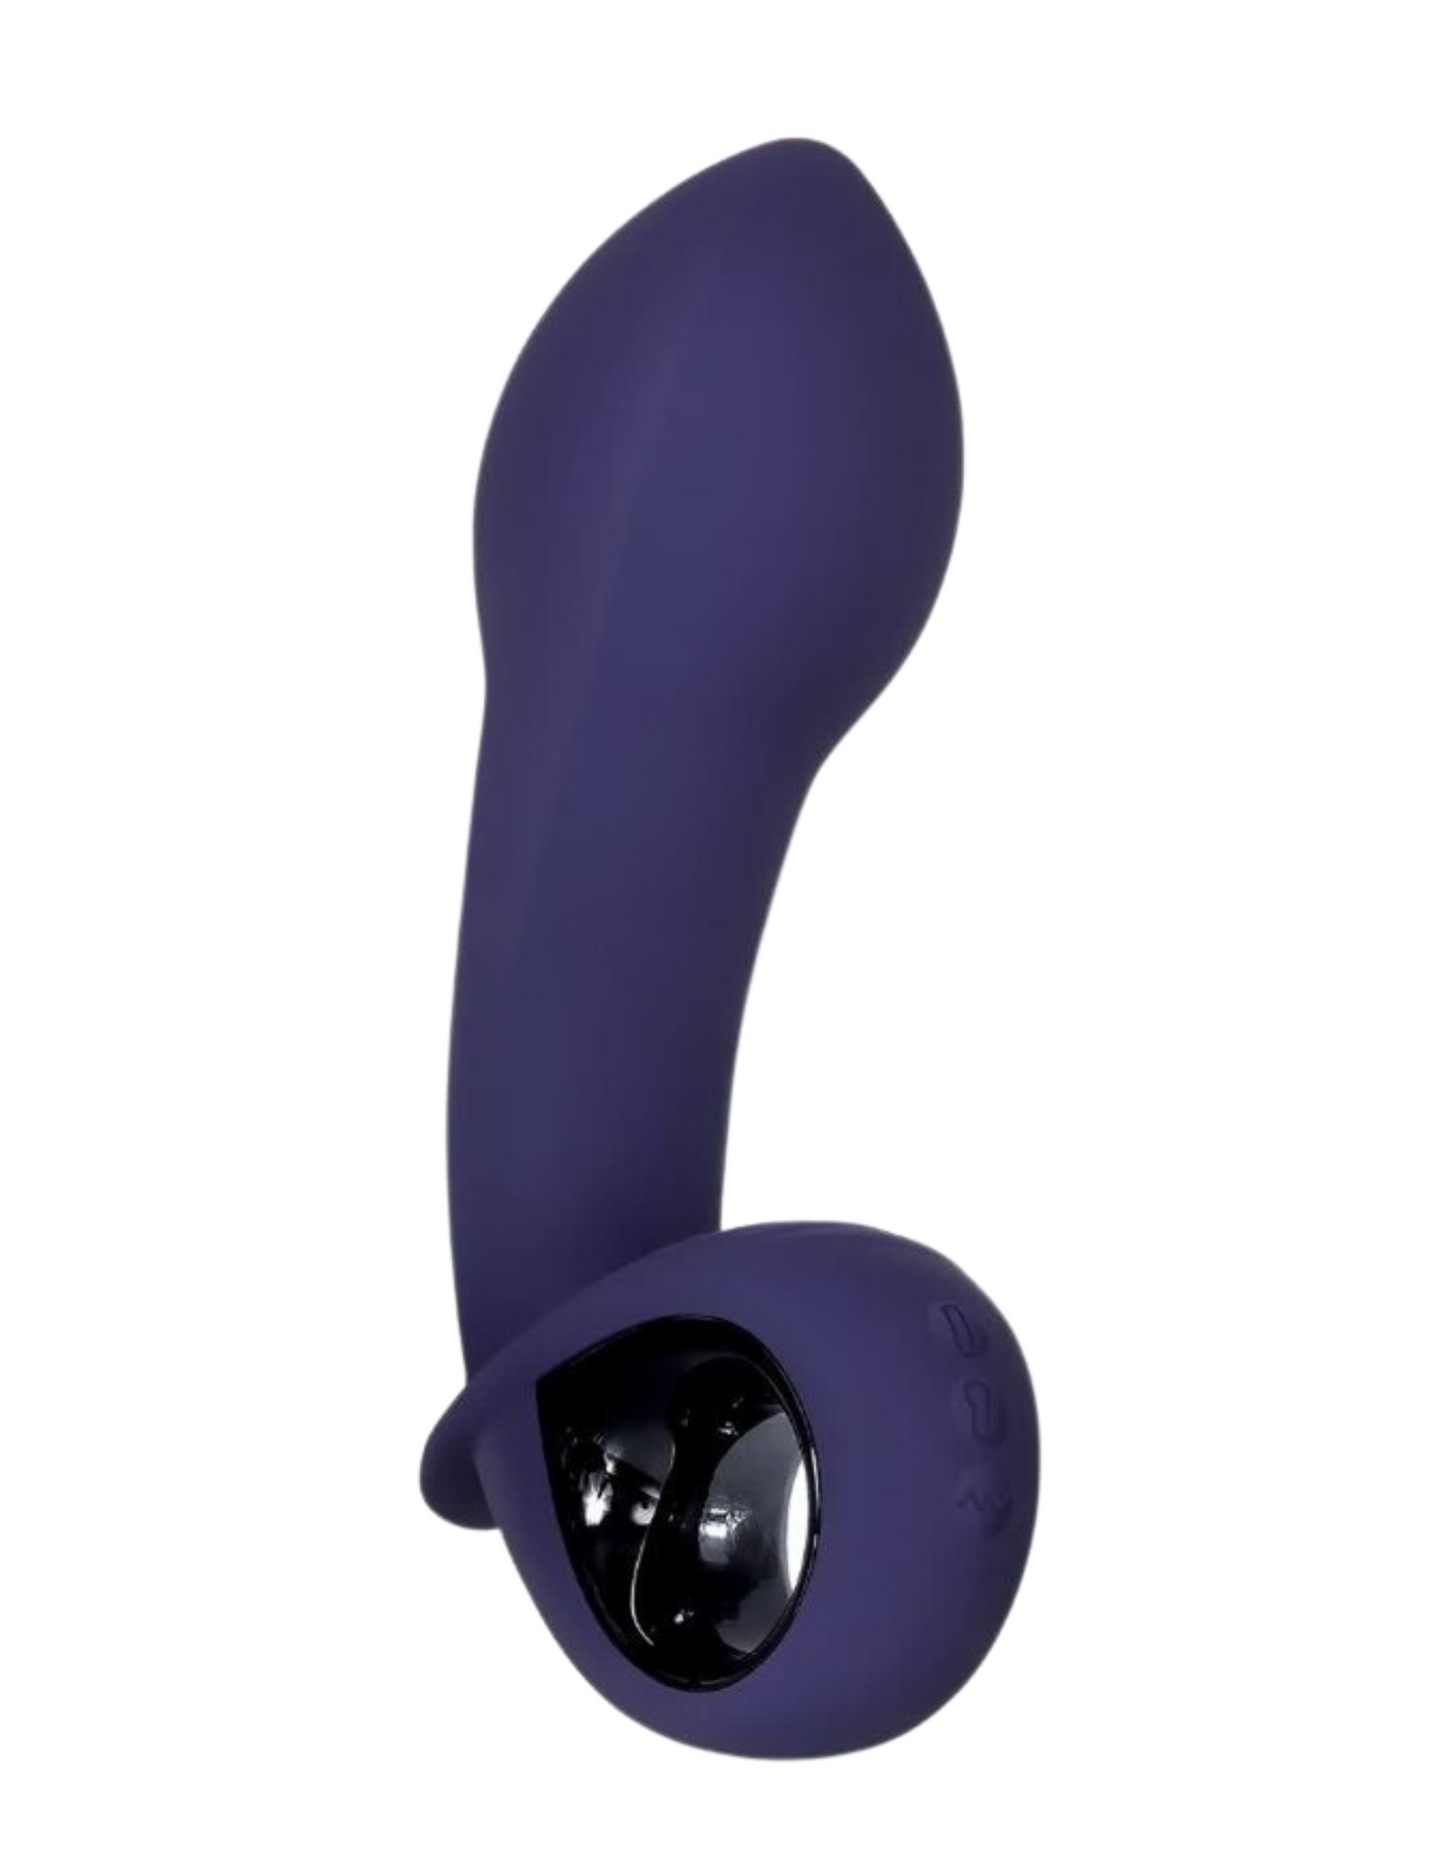 Close-up photo shows the Inflatable G from Evolved Novelties (inflated) and the looped handle for easy holding.